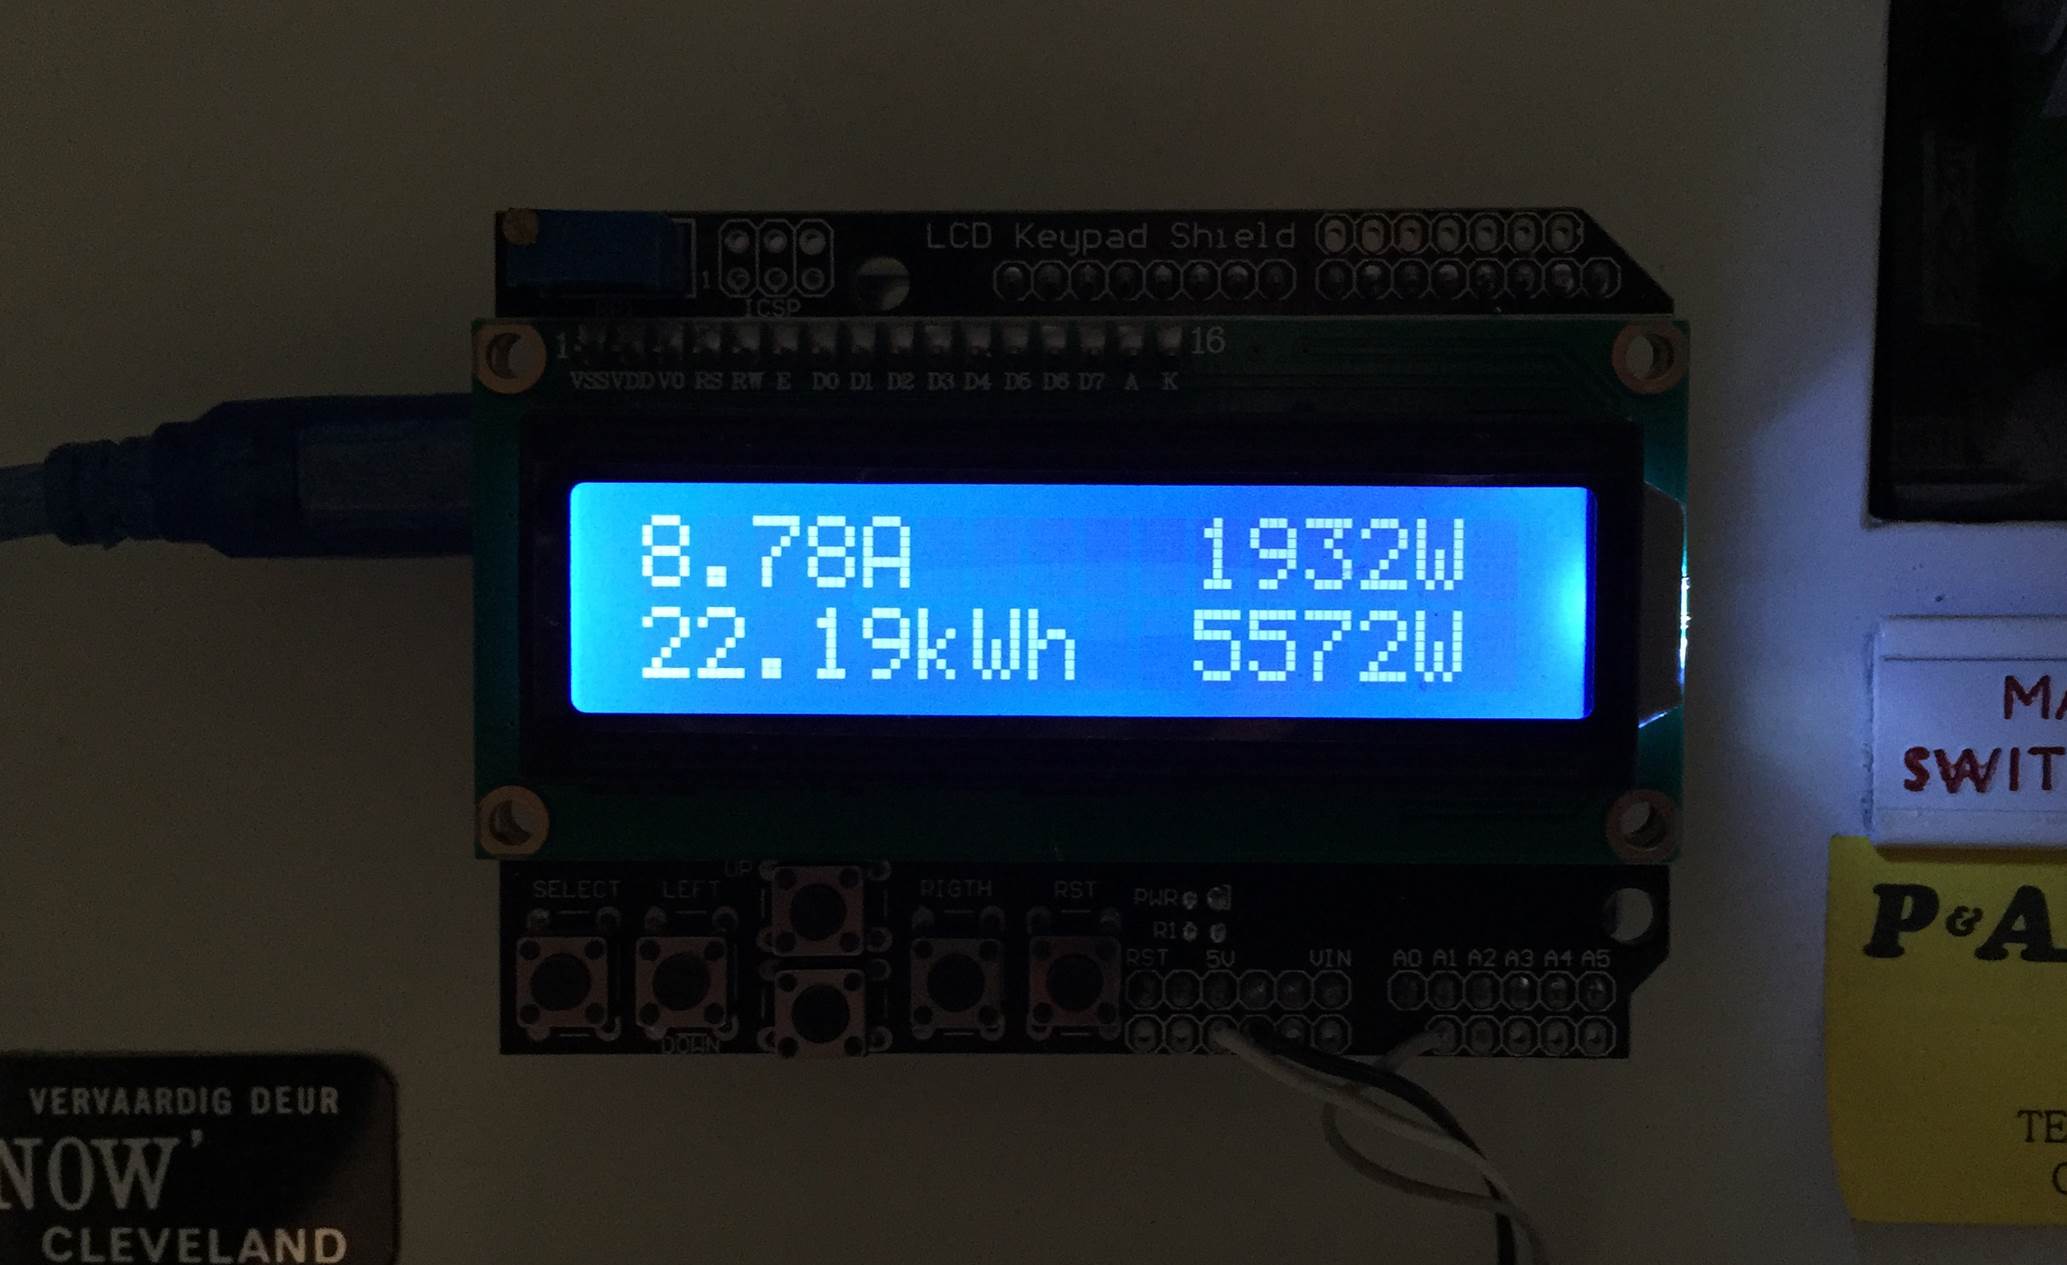 Rick Flash SSD Project Uses an ESP8266 to Never Give You Up, Let